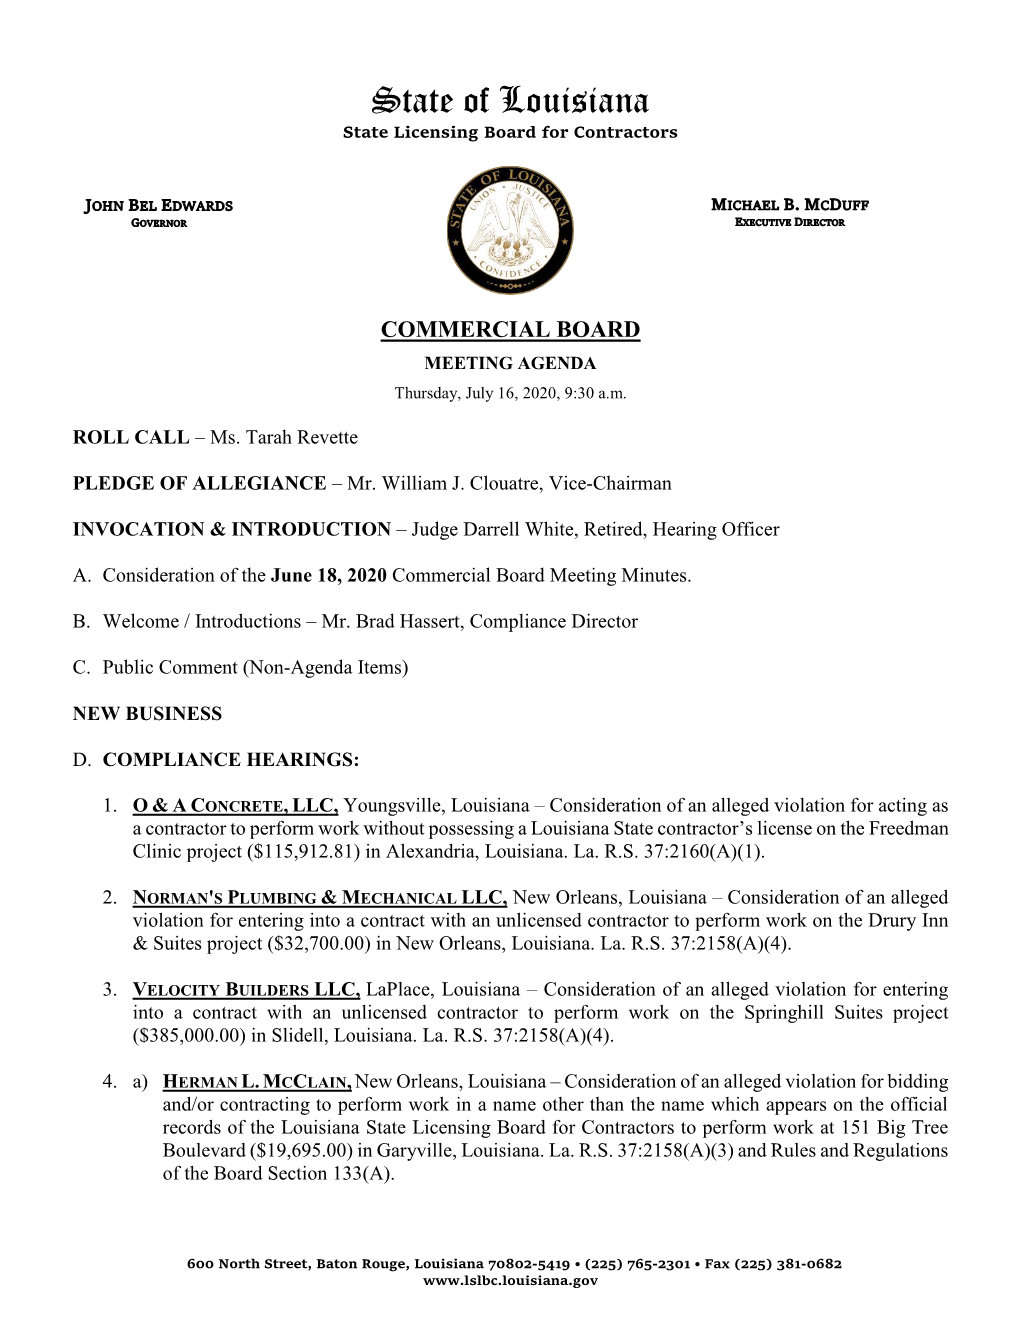 State of Louisiana State Licensing Board for Contractors